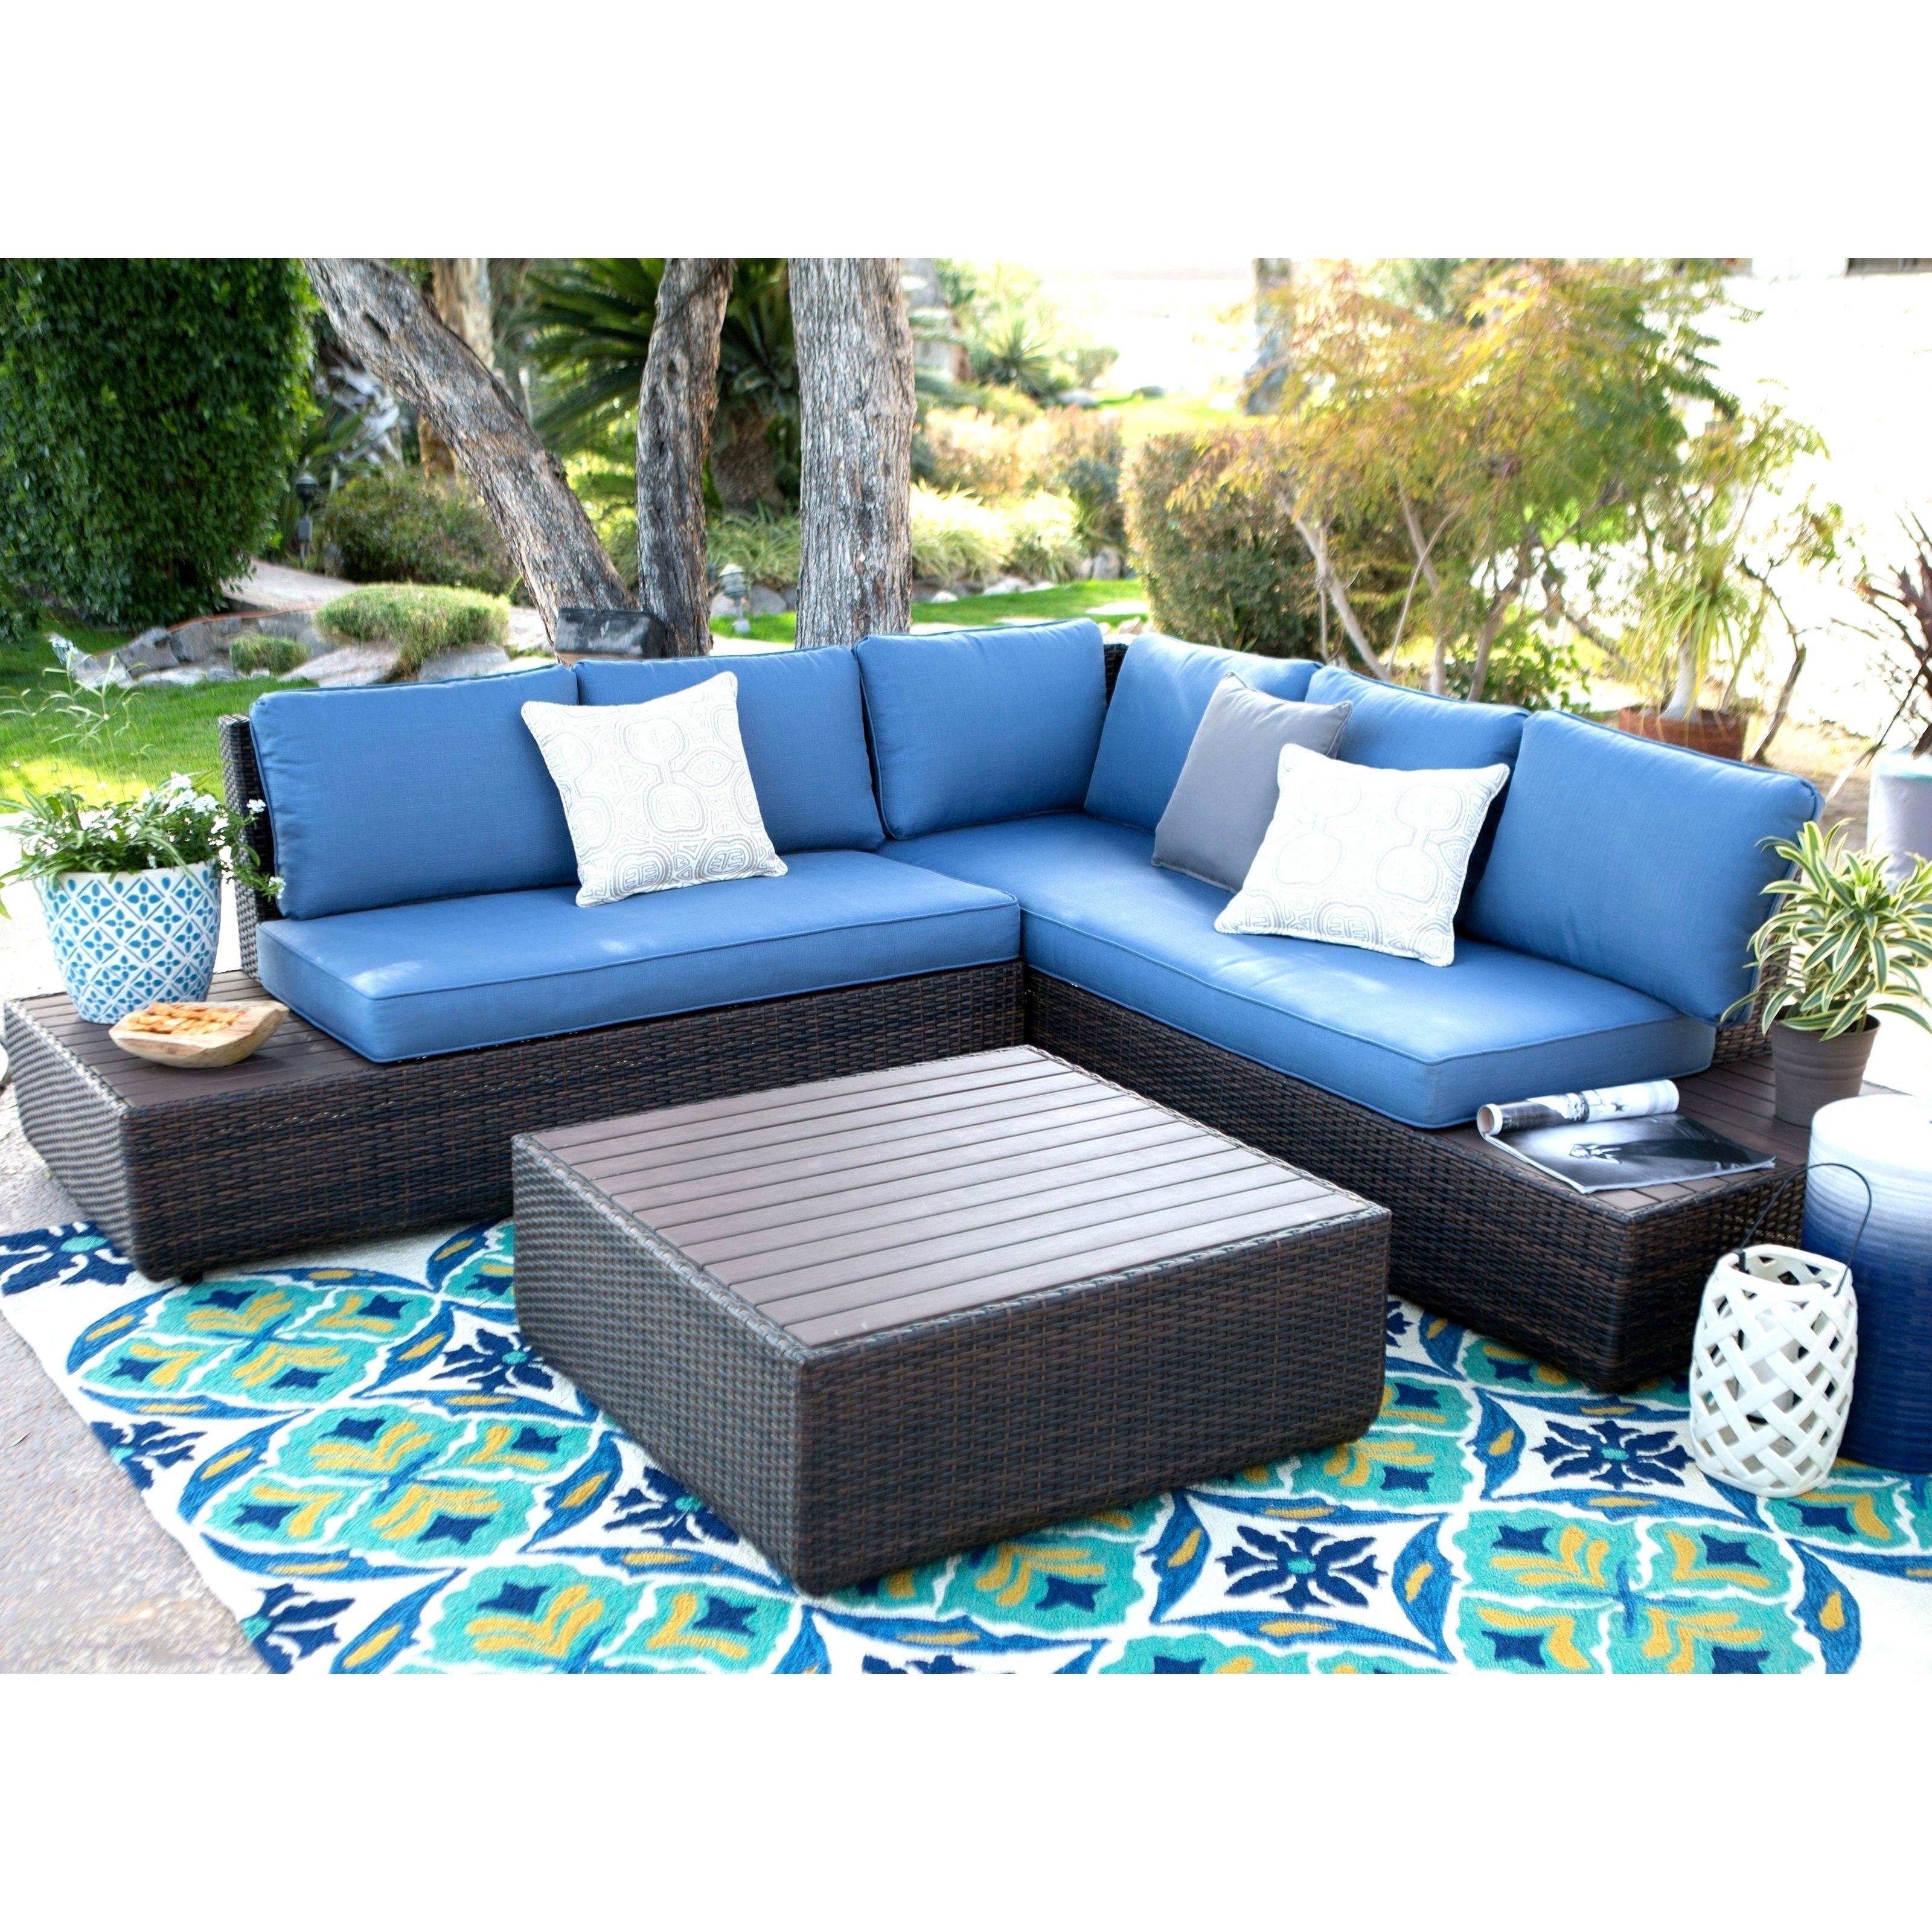 Well Known Edmonton Patio Conversation Sets Pertaining To Outdoor Patio Furniture Edmonton Luxury Sectional Patio Furniture (View 9 of 20)